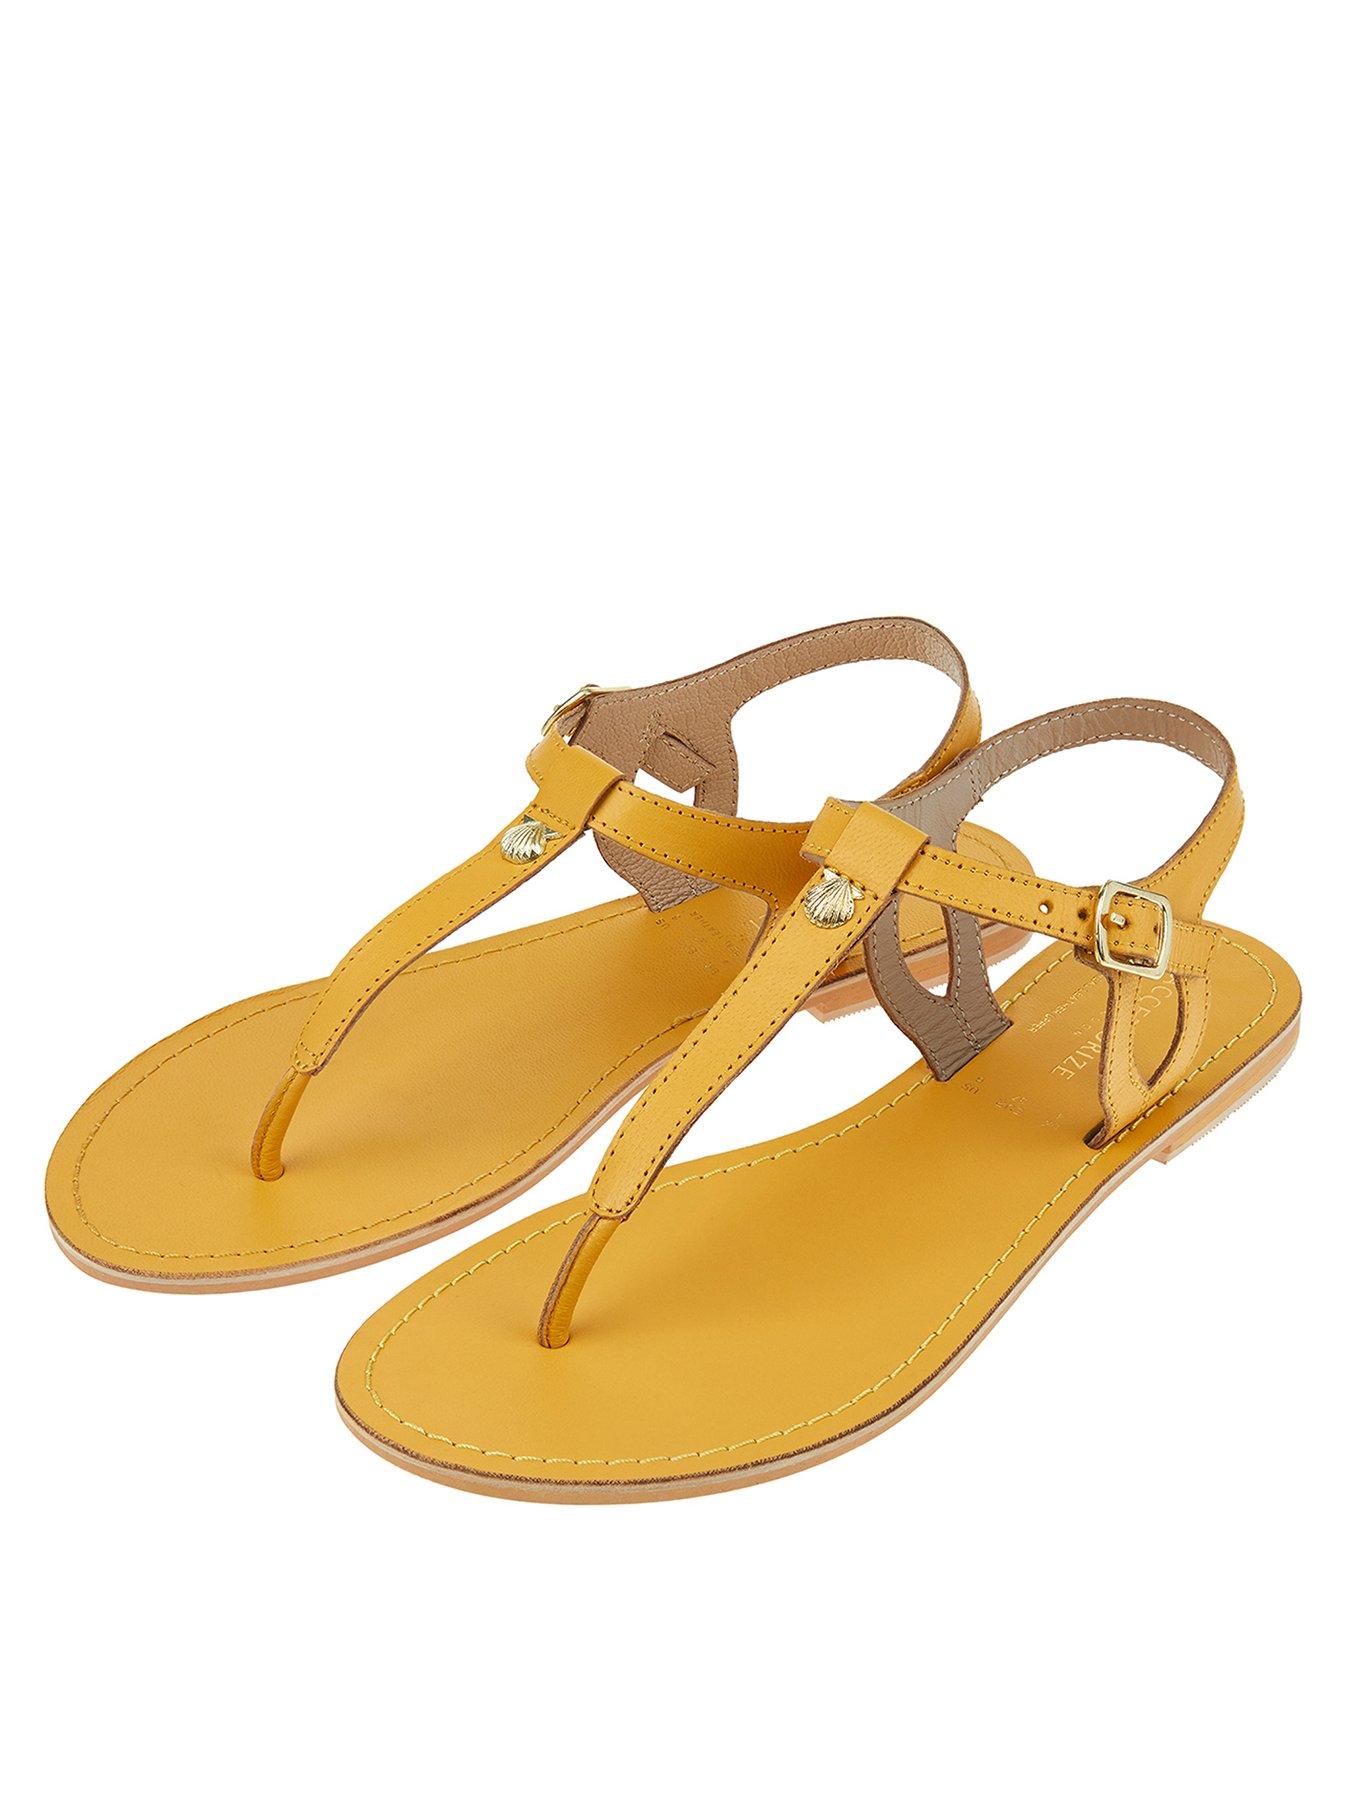 yellow sandals size 5